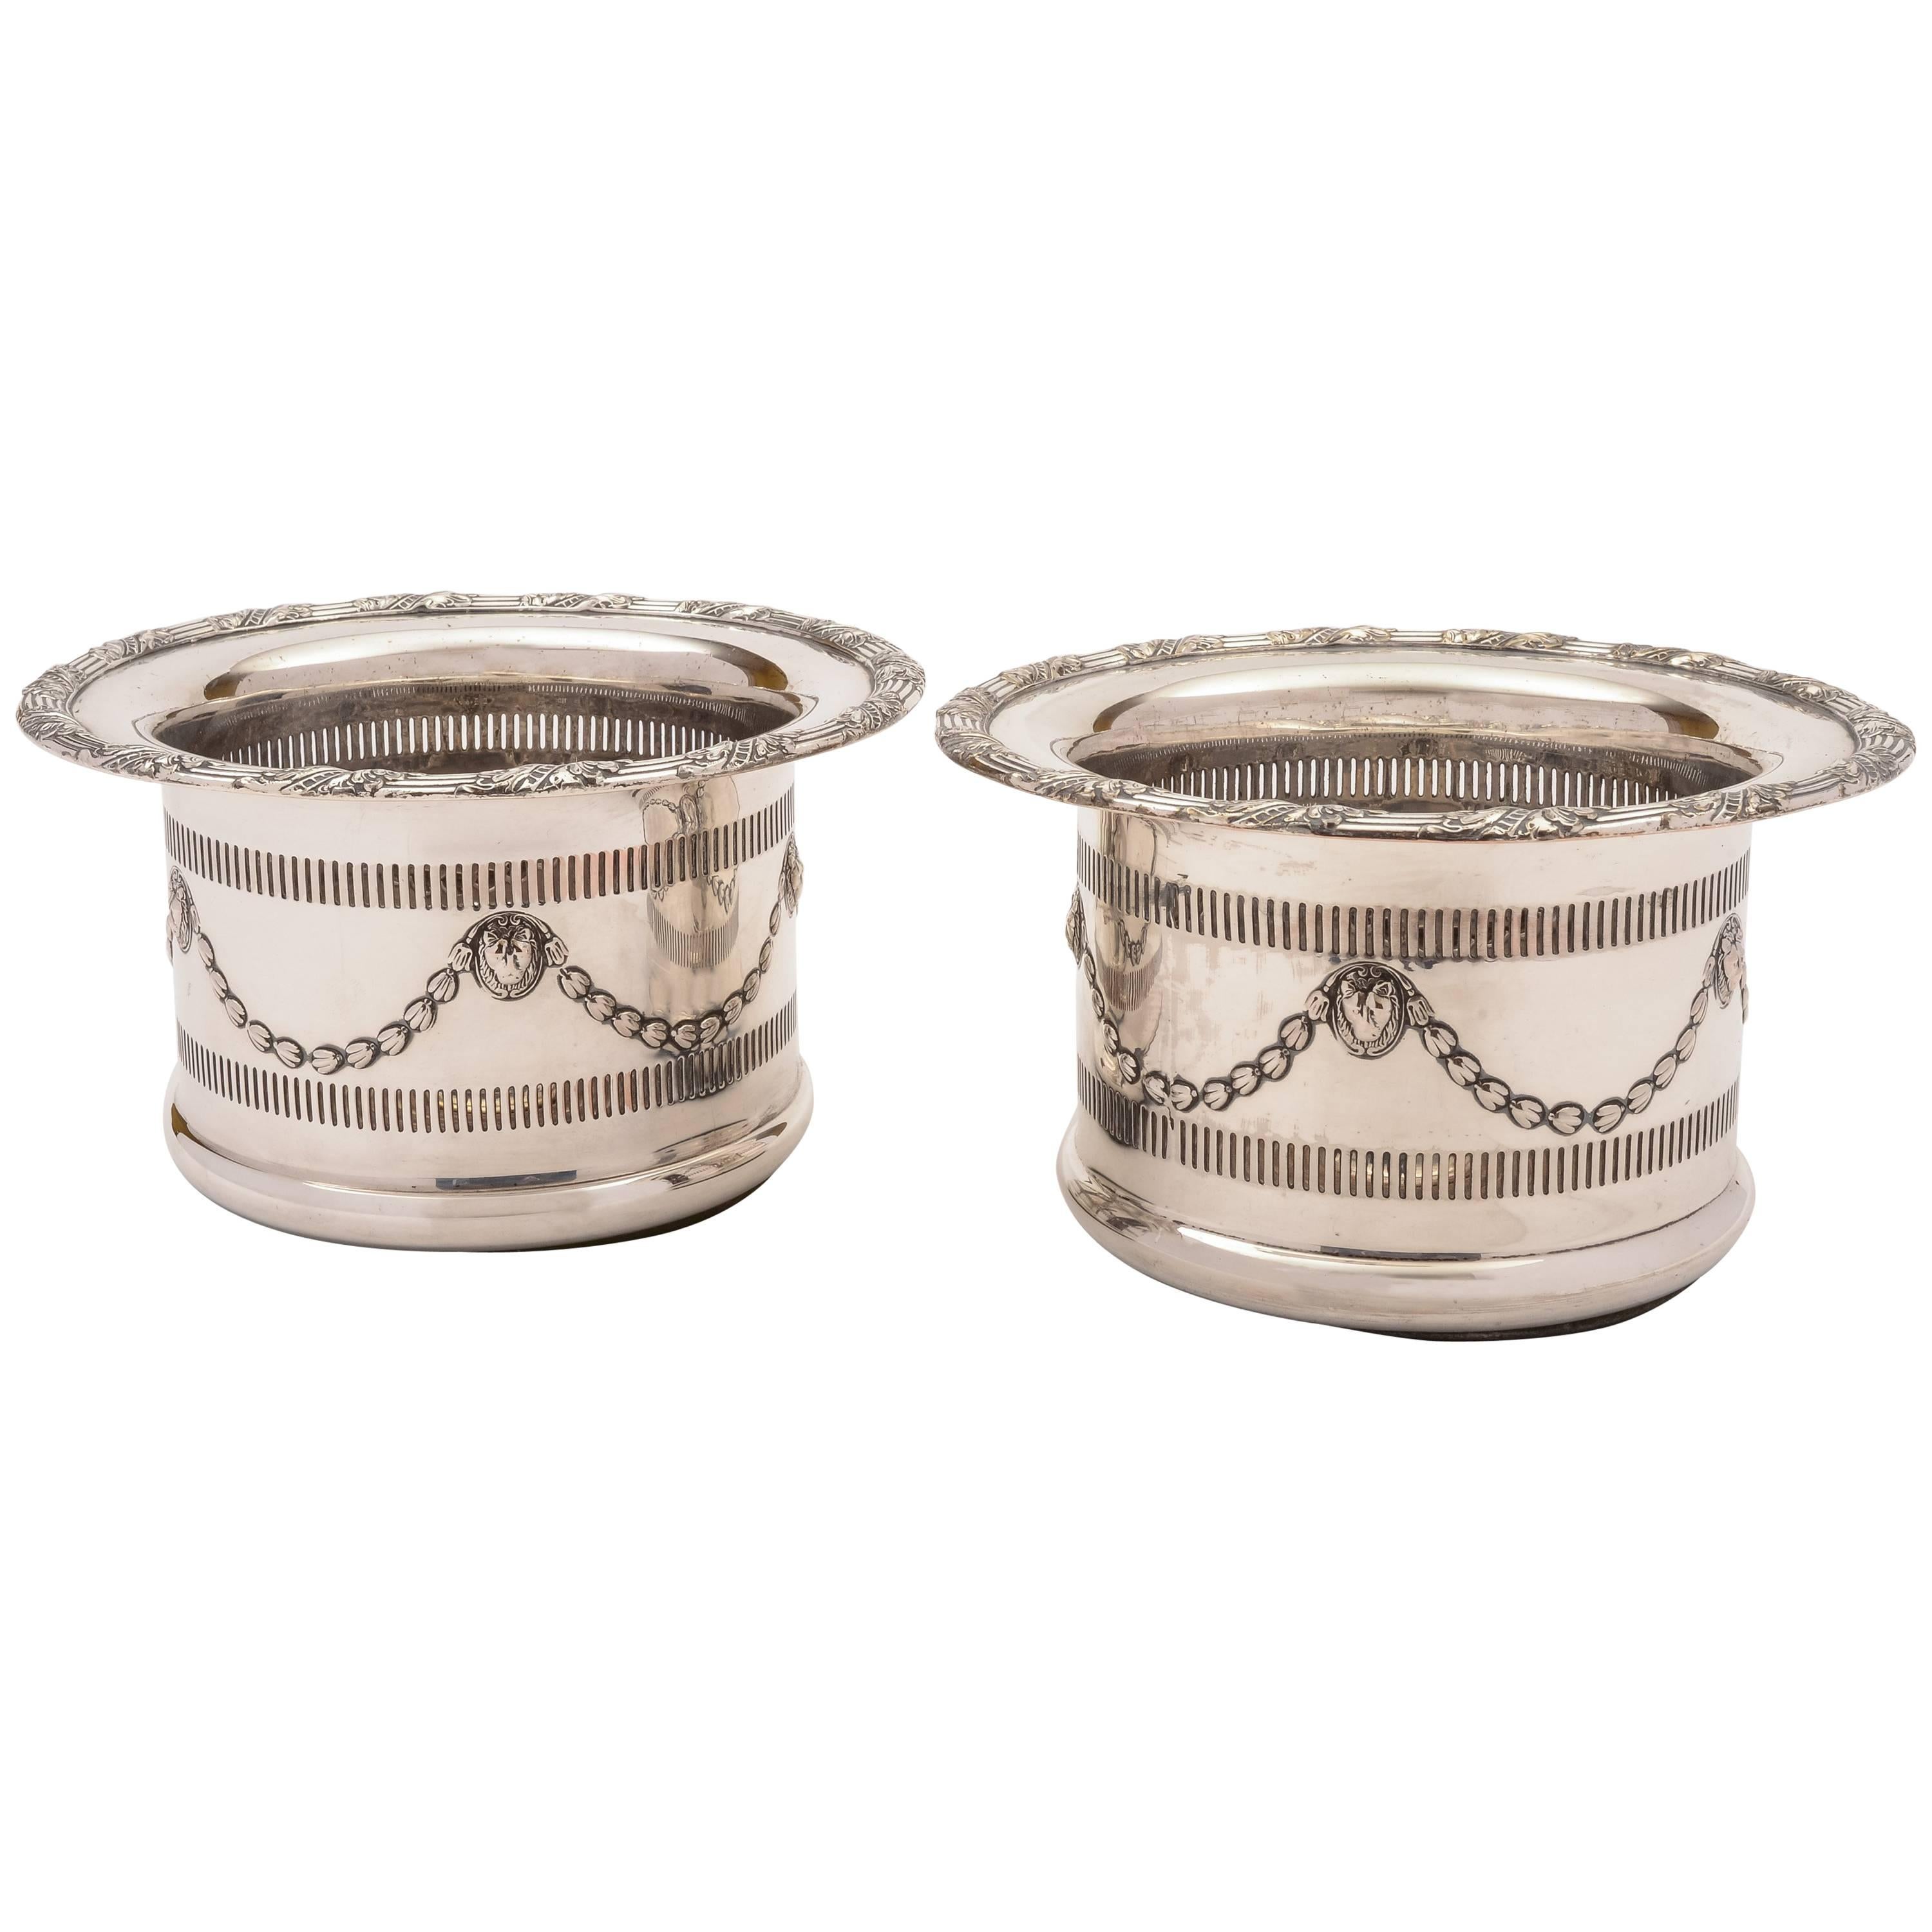 Pair of Edwardian Silver Plated Champagne Coasters, circa 1905 For Sale